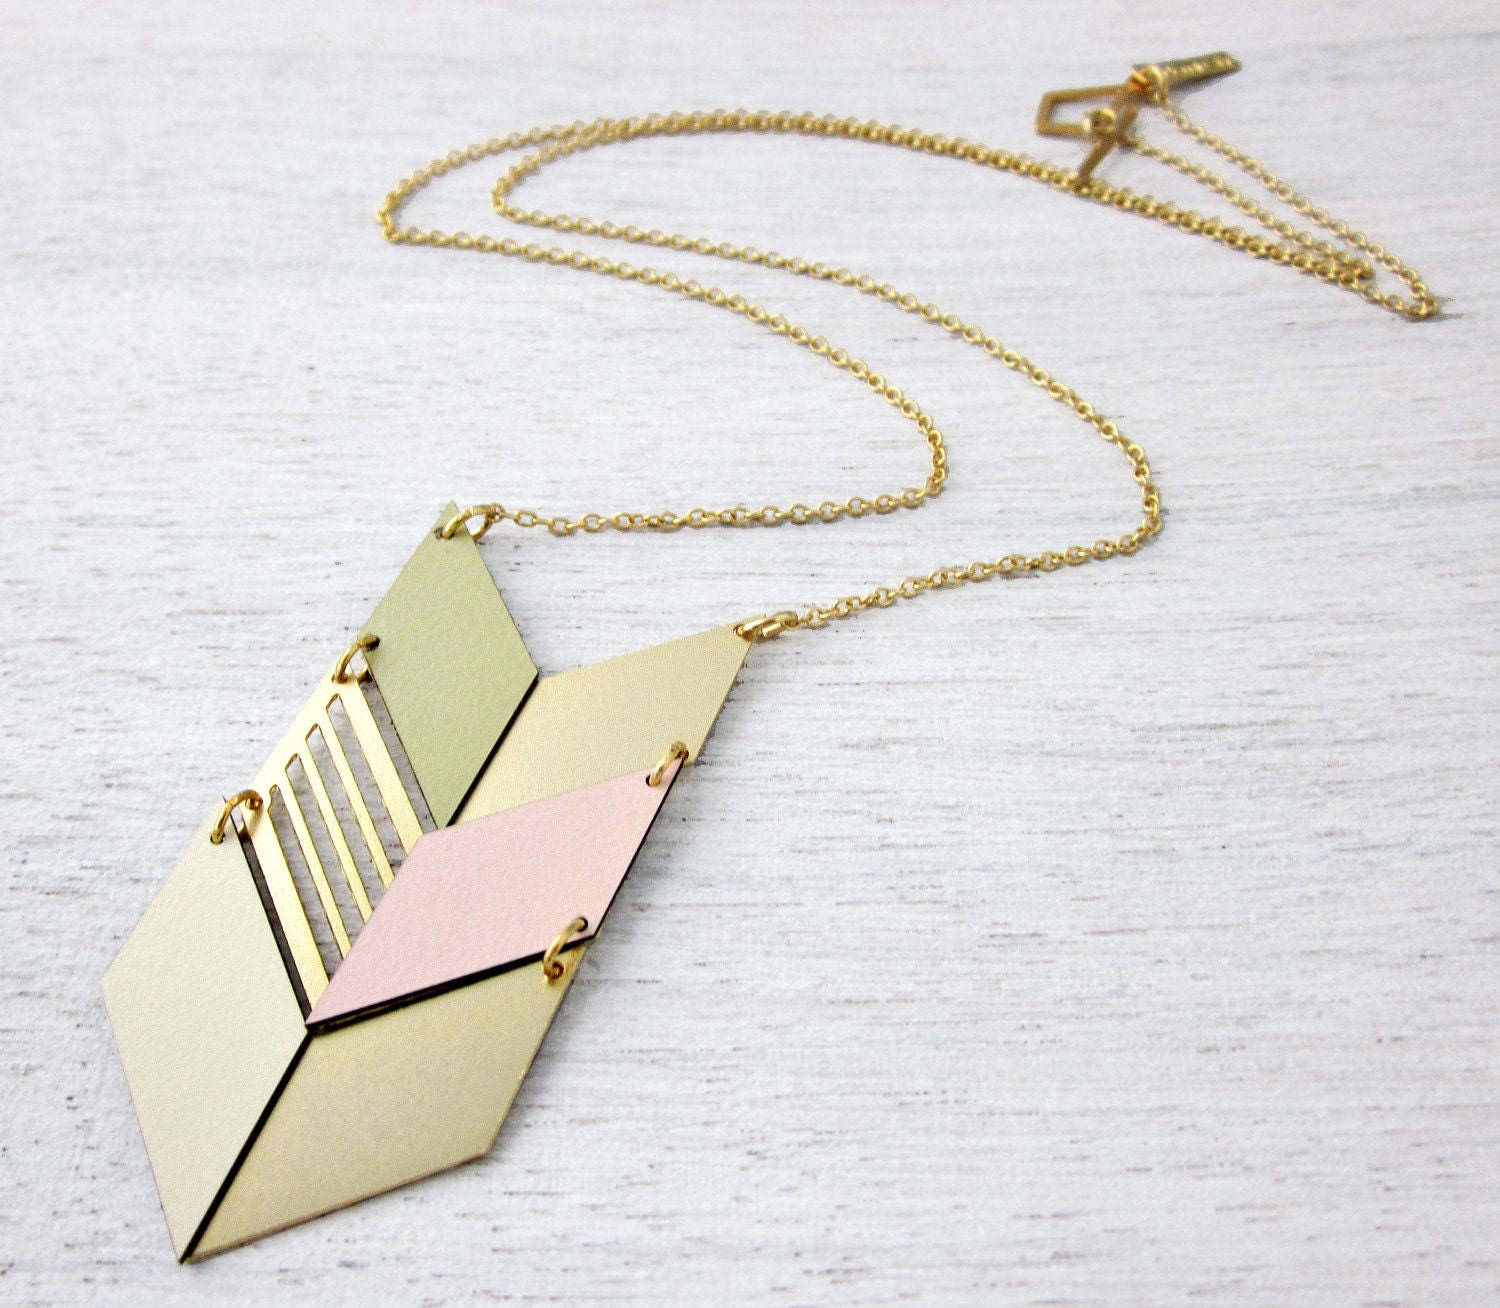 Formica Long Tribal Necklace in Gold - shlomitofir